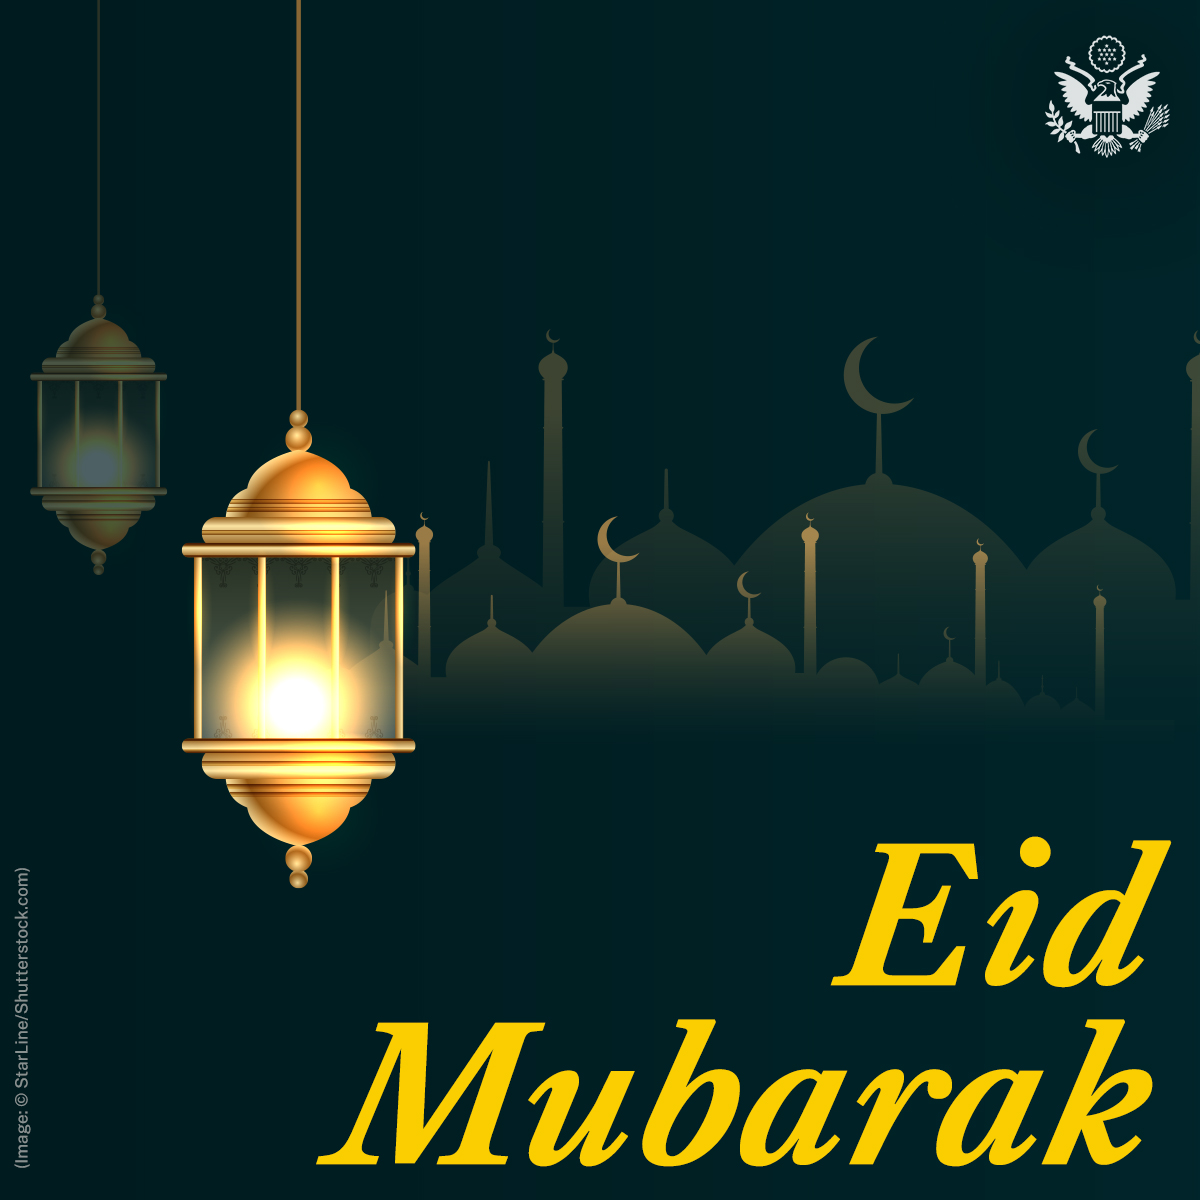 #EidAlFitr Mubarak to all in #Montenegro celebrating today! Learn more about how Muslim Americans celebrate #Ramadan in the 🇺🇸, embracing customs from around the world ➡️ share.america.gov/on-ramadan-in-…